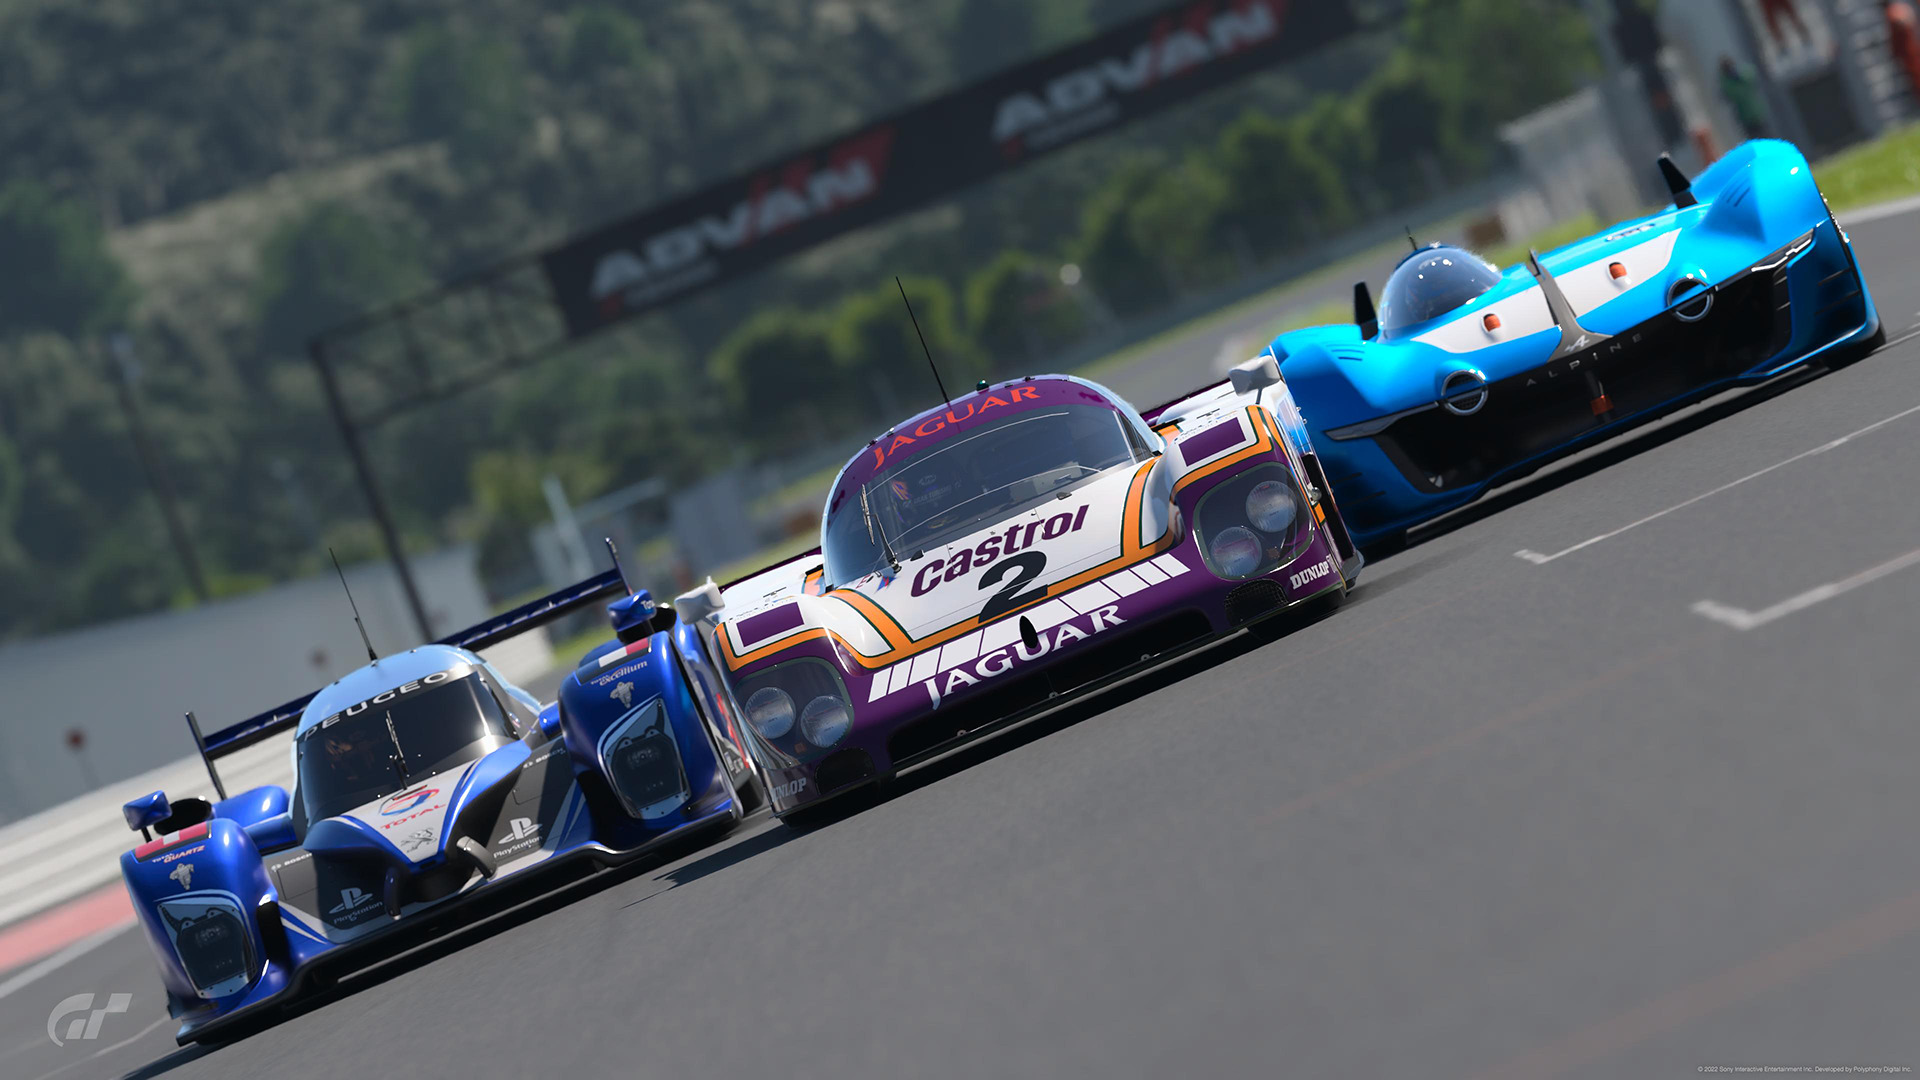 How the Creator of Gran Turismo Wants Motorsport to Change – GTPlanet